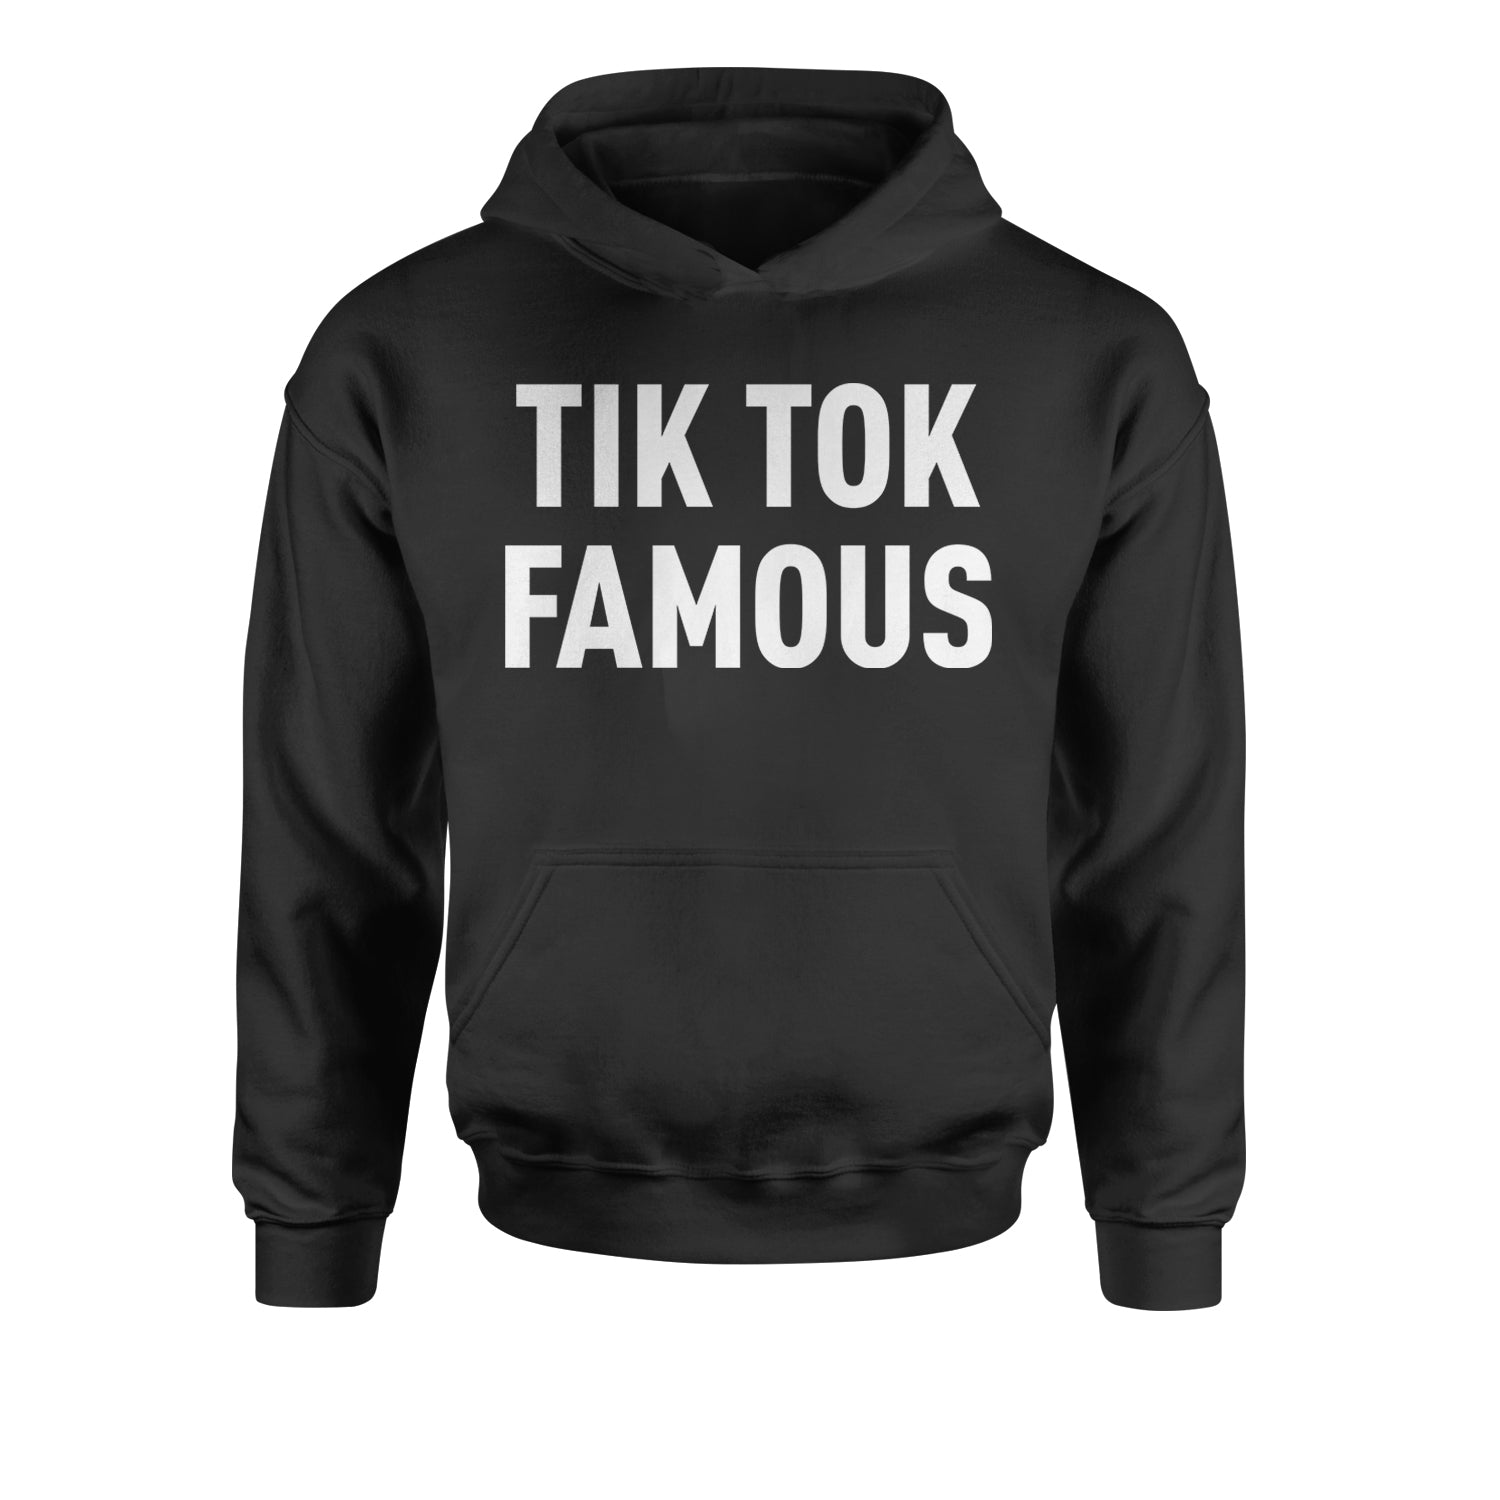 Tik Tok Famous Influencer Promoter Youth-Sized Hoodie